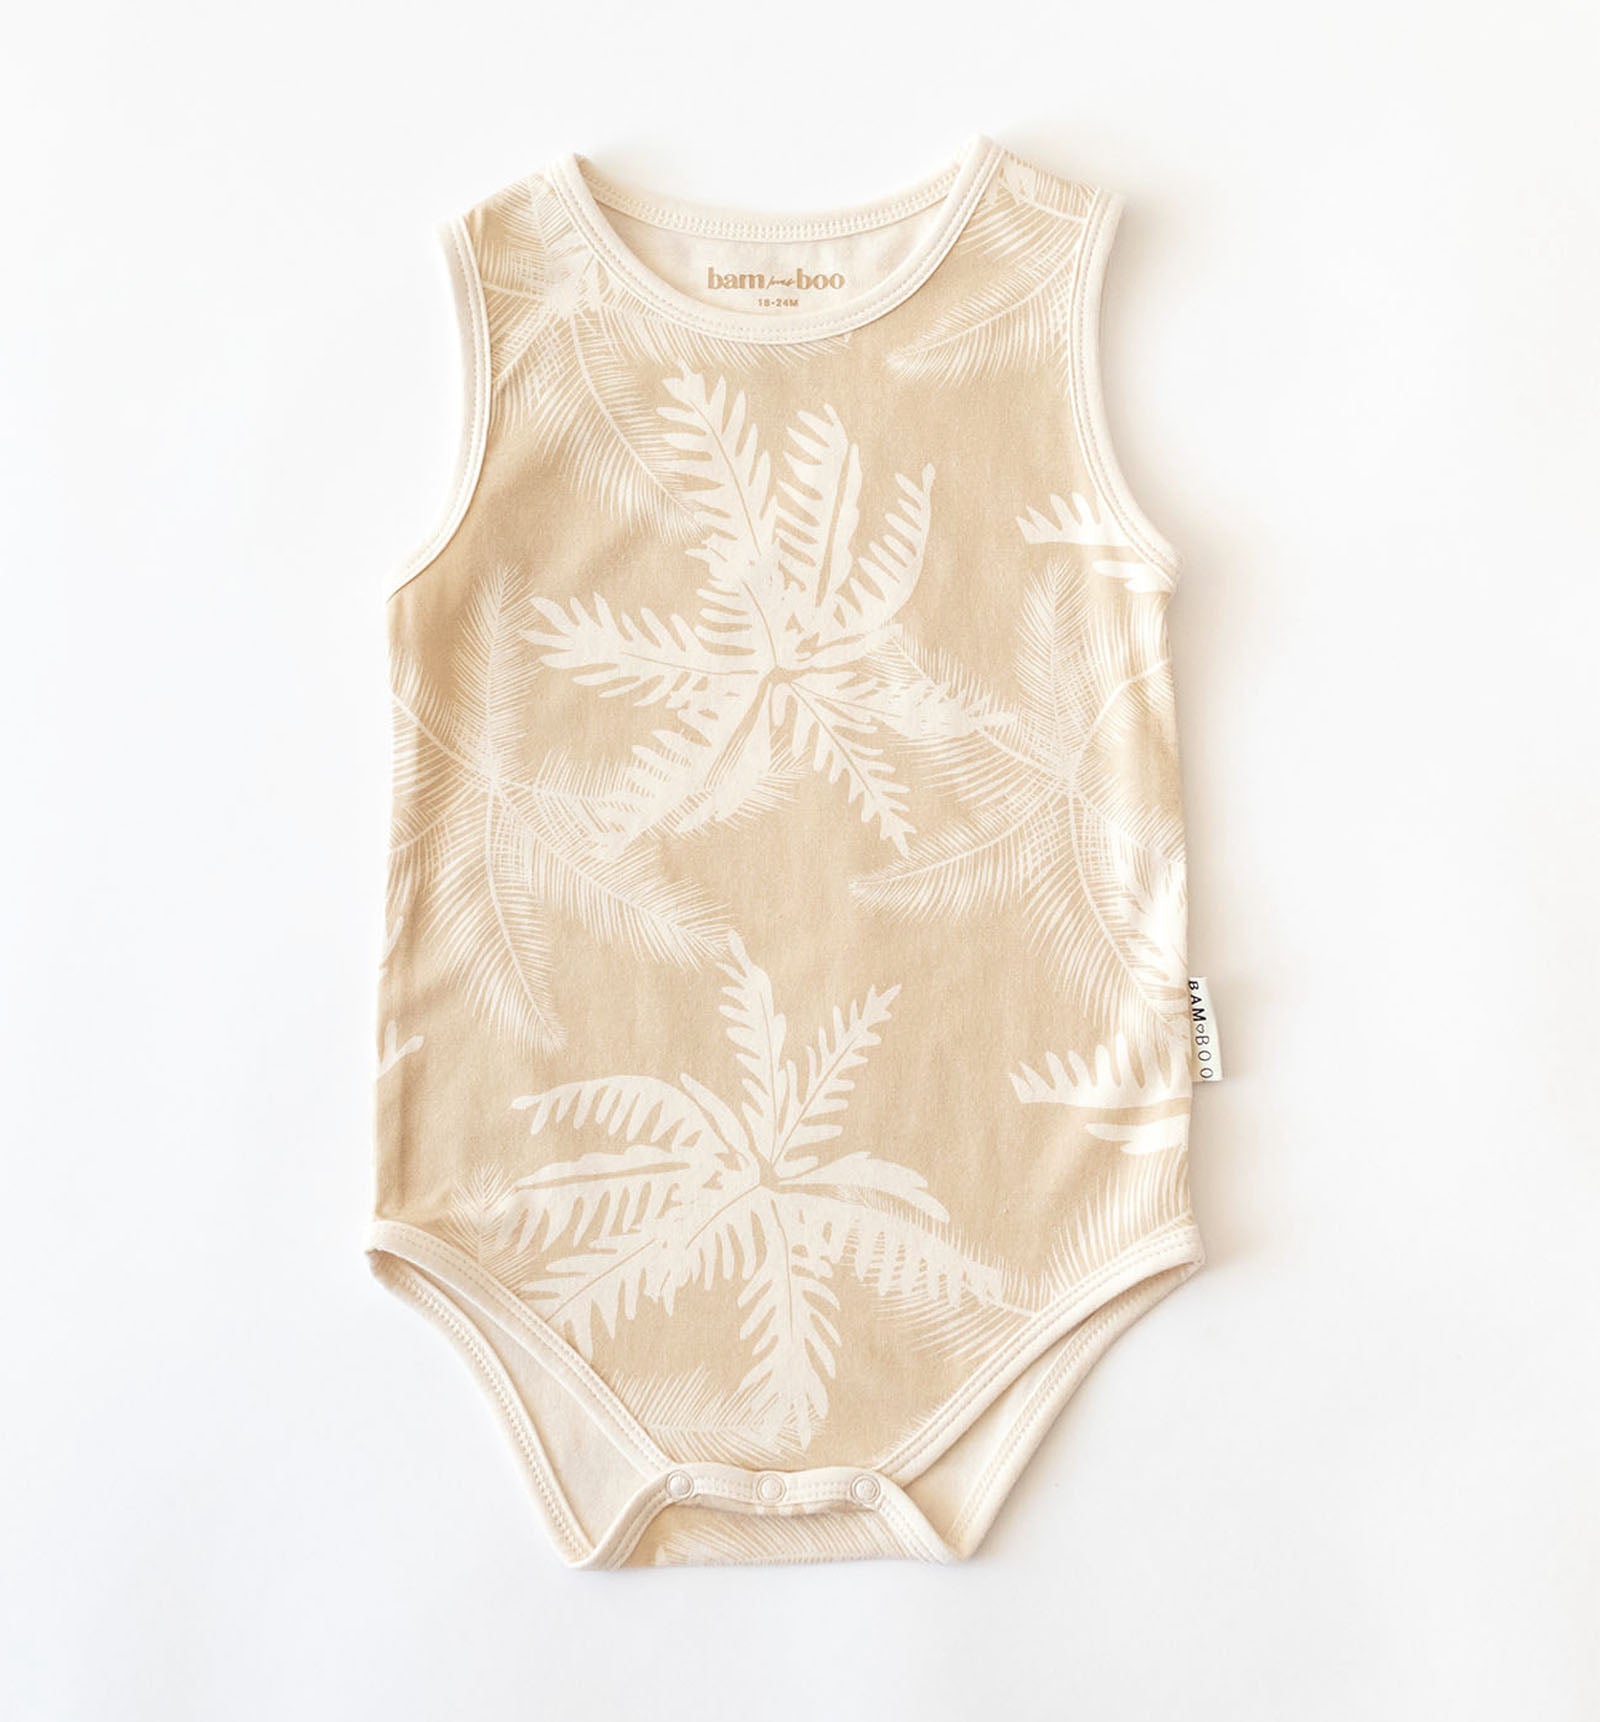 Palm printed beige and cream baby onesie by Bam Loves Boo